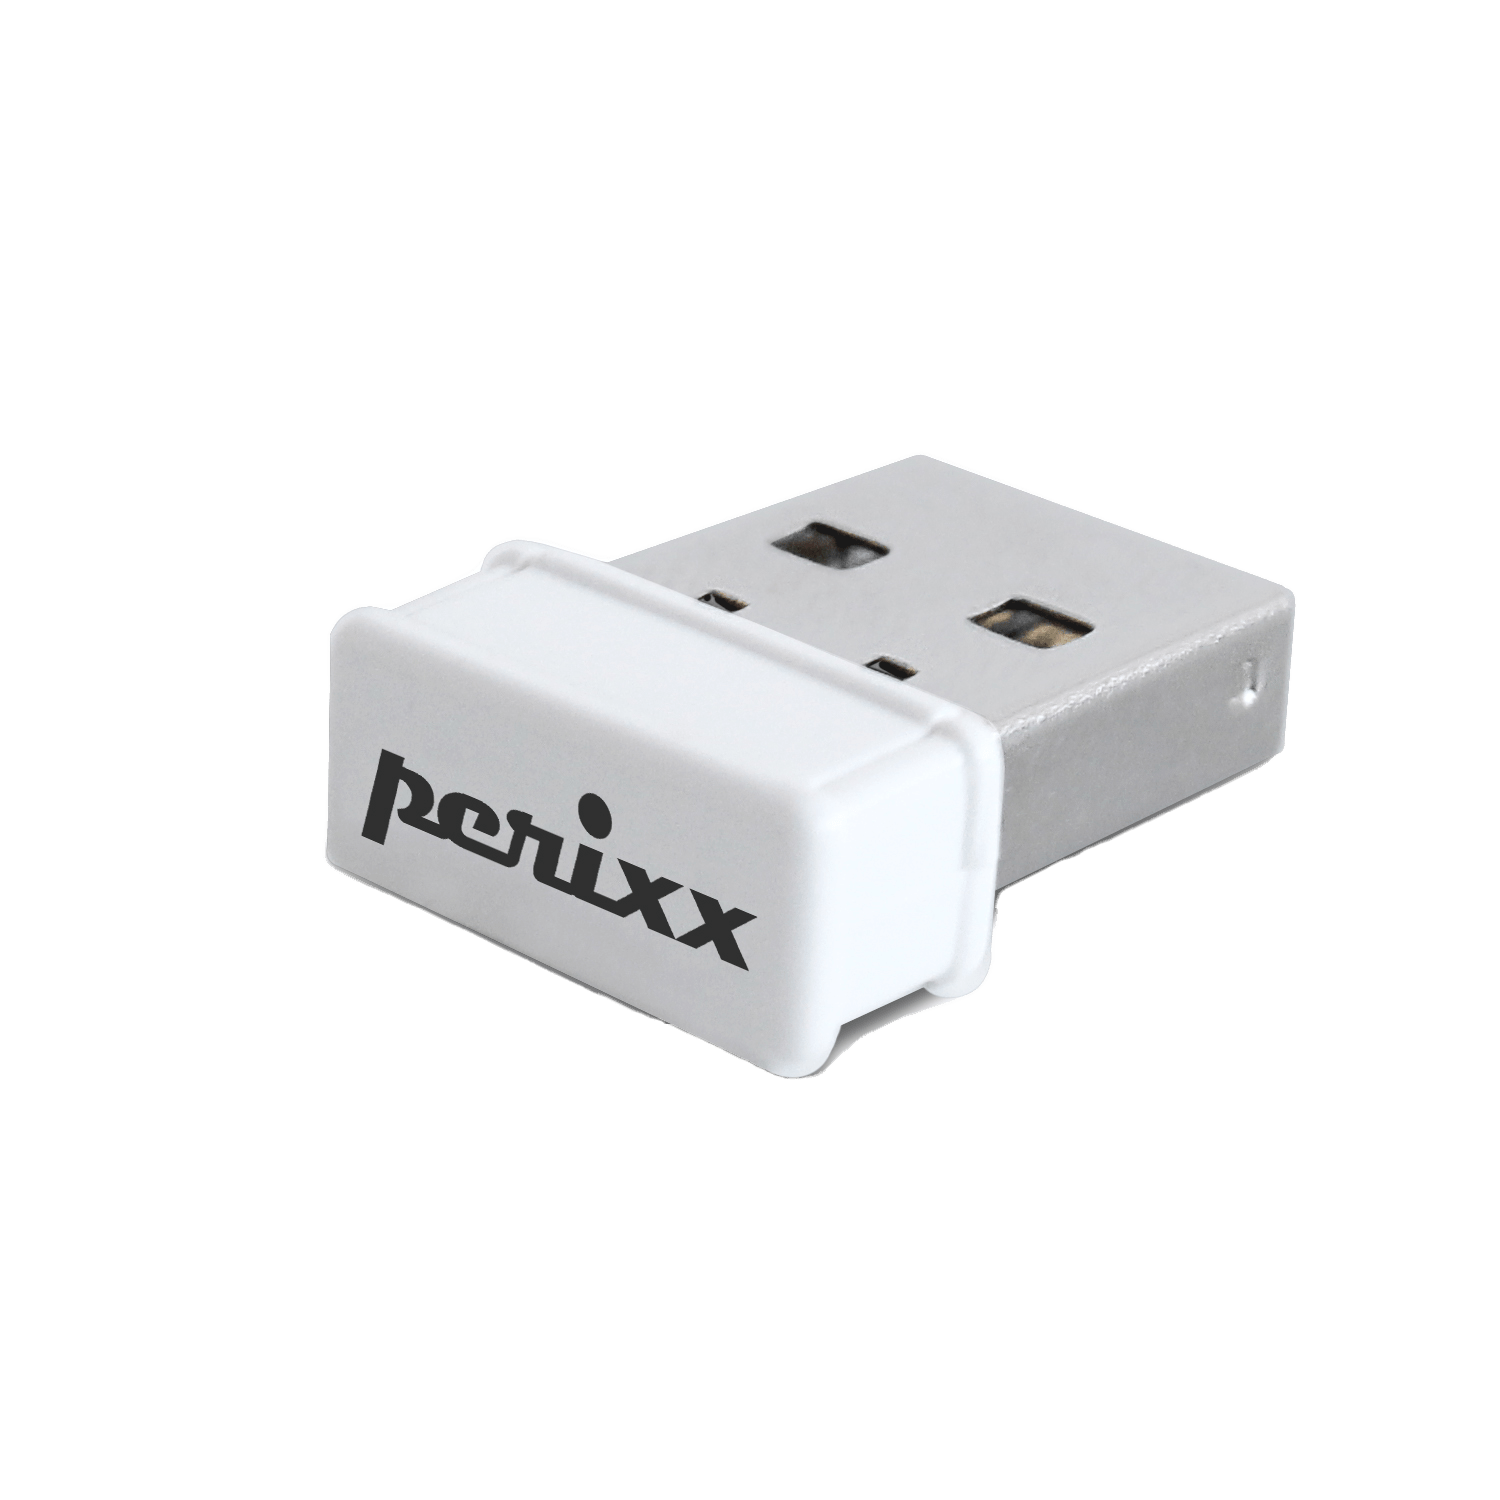 USB dongle receiver for PERIDUO-713 - Perixx Europe